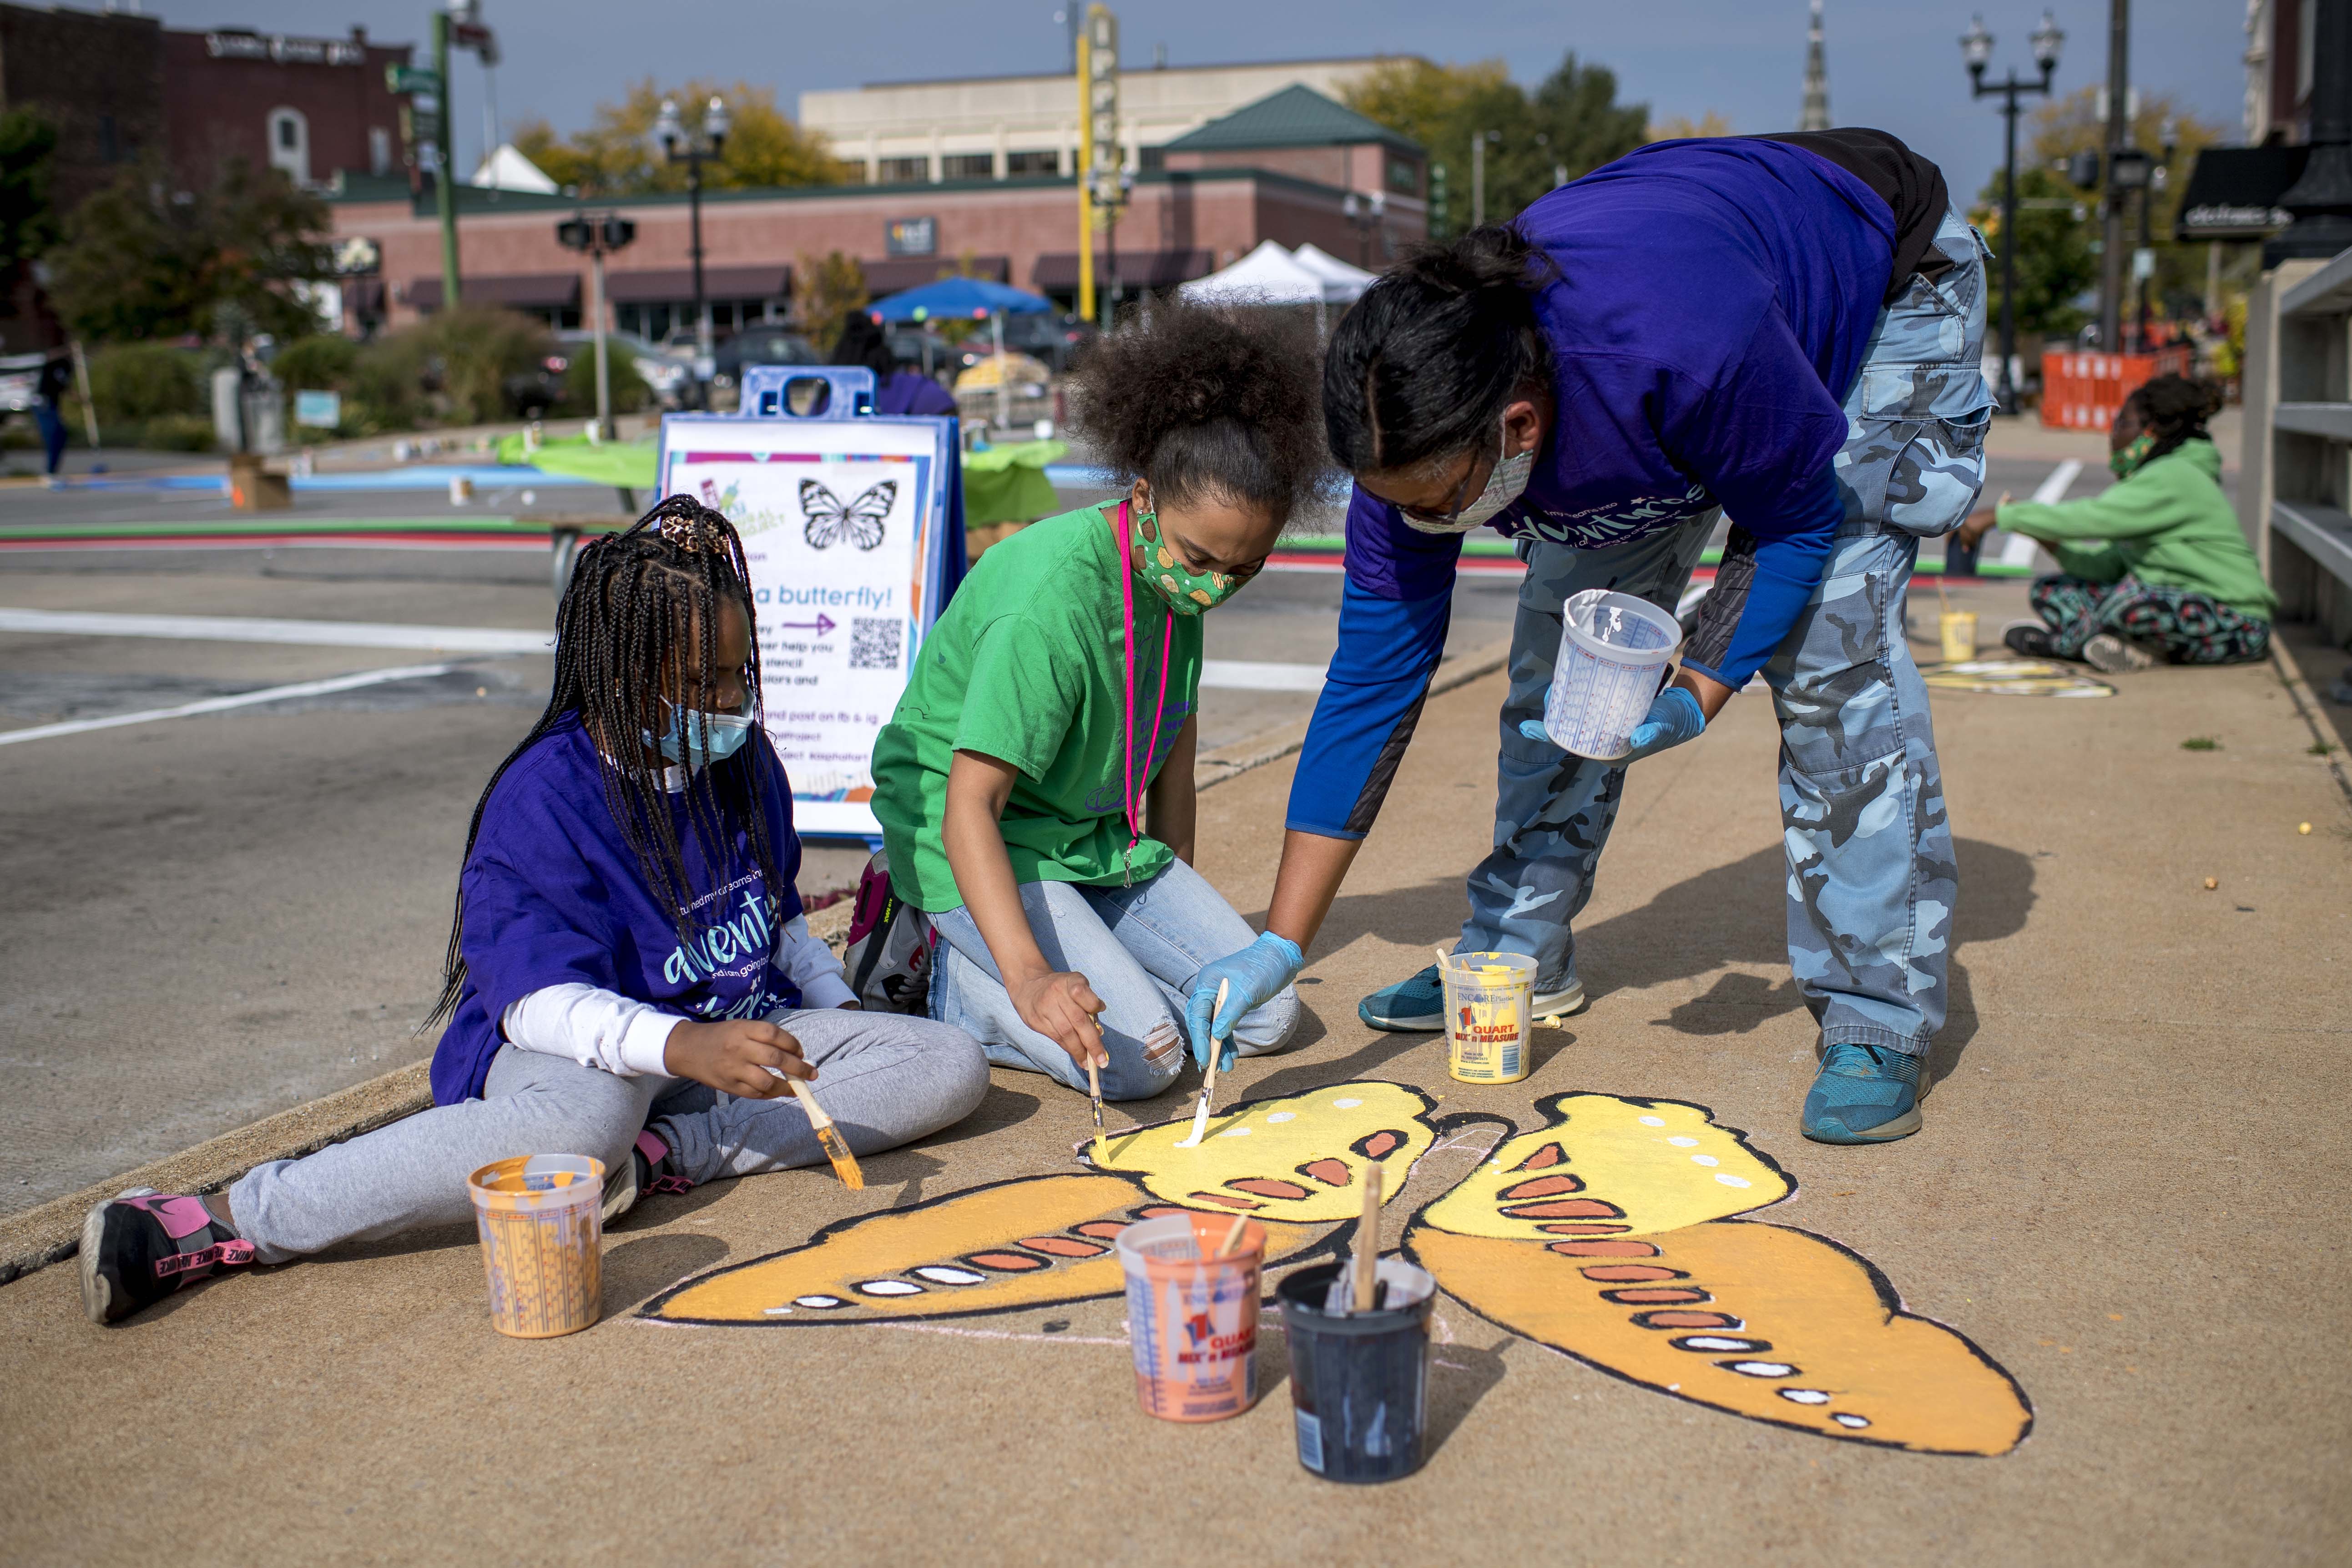 Painting butterflies along Court Street during the Great Mural Project